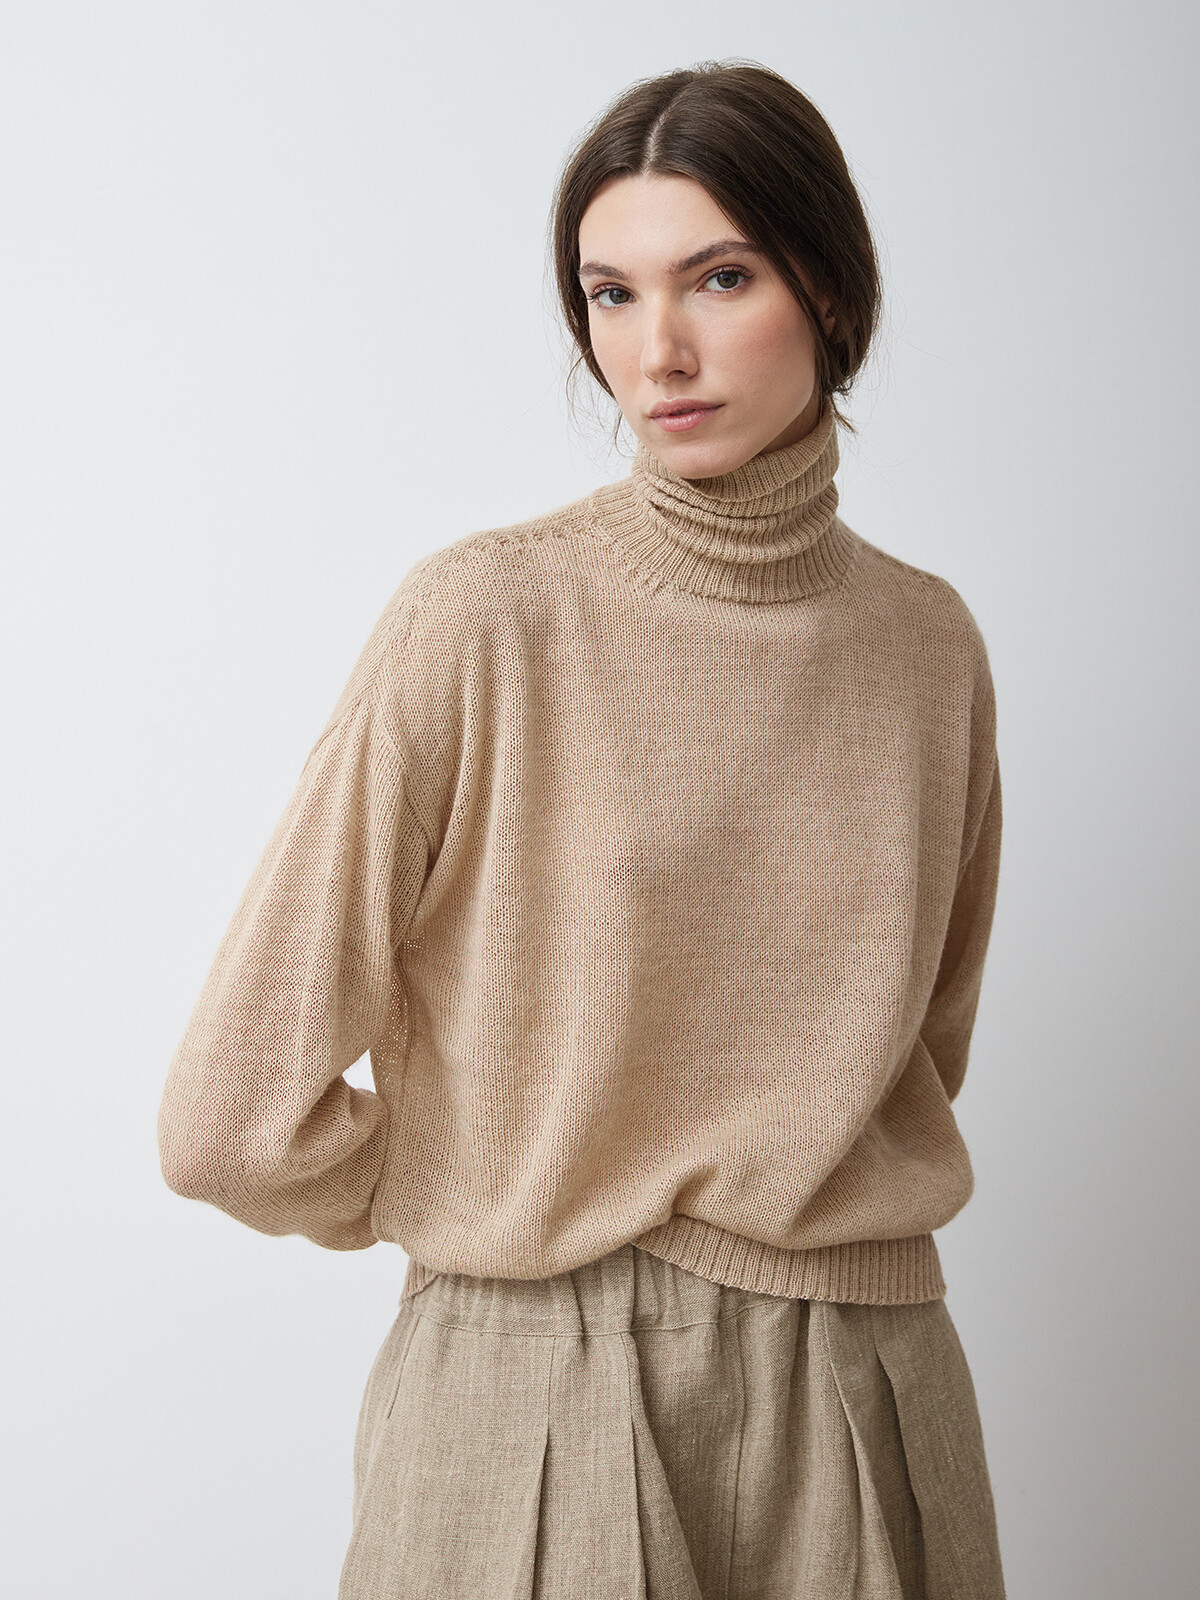 the Roll-neck Image